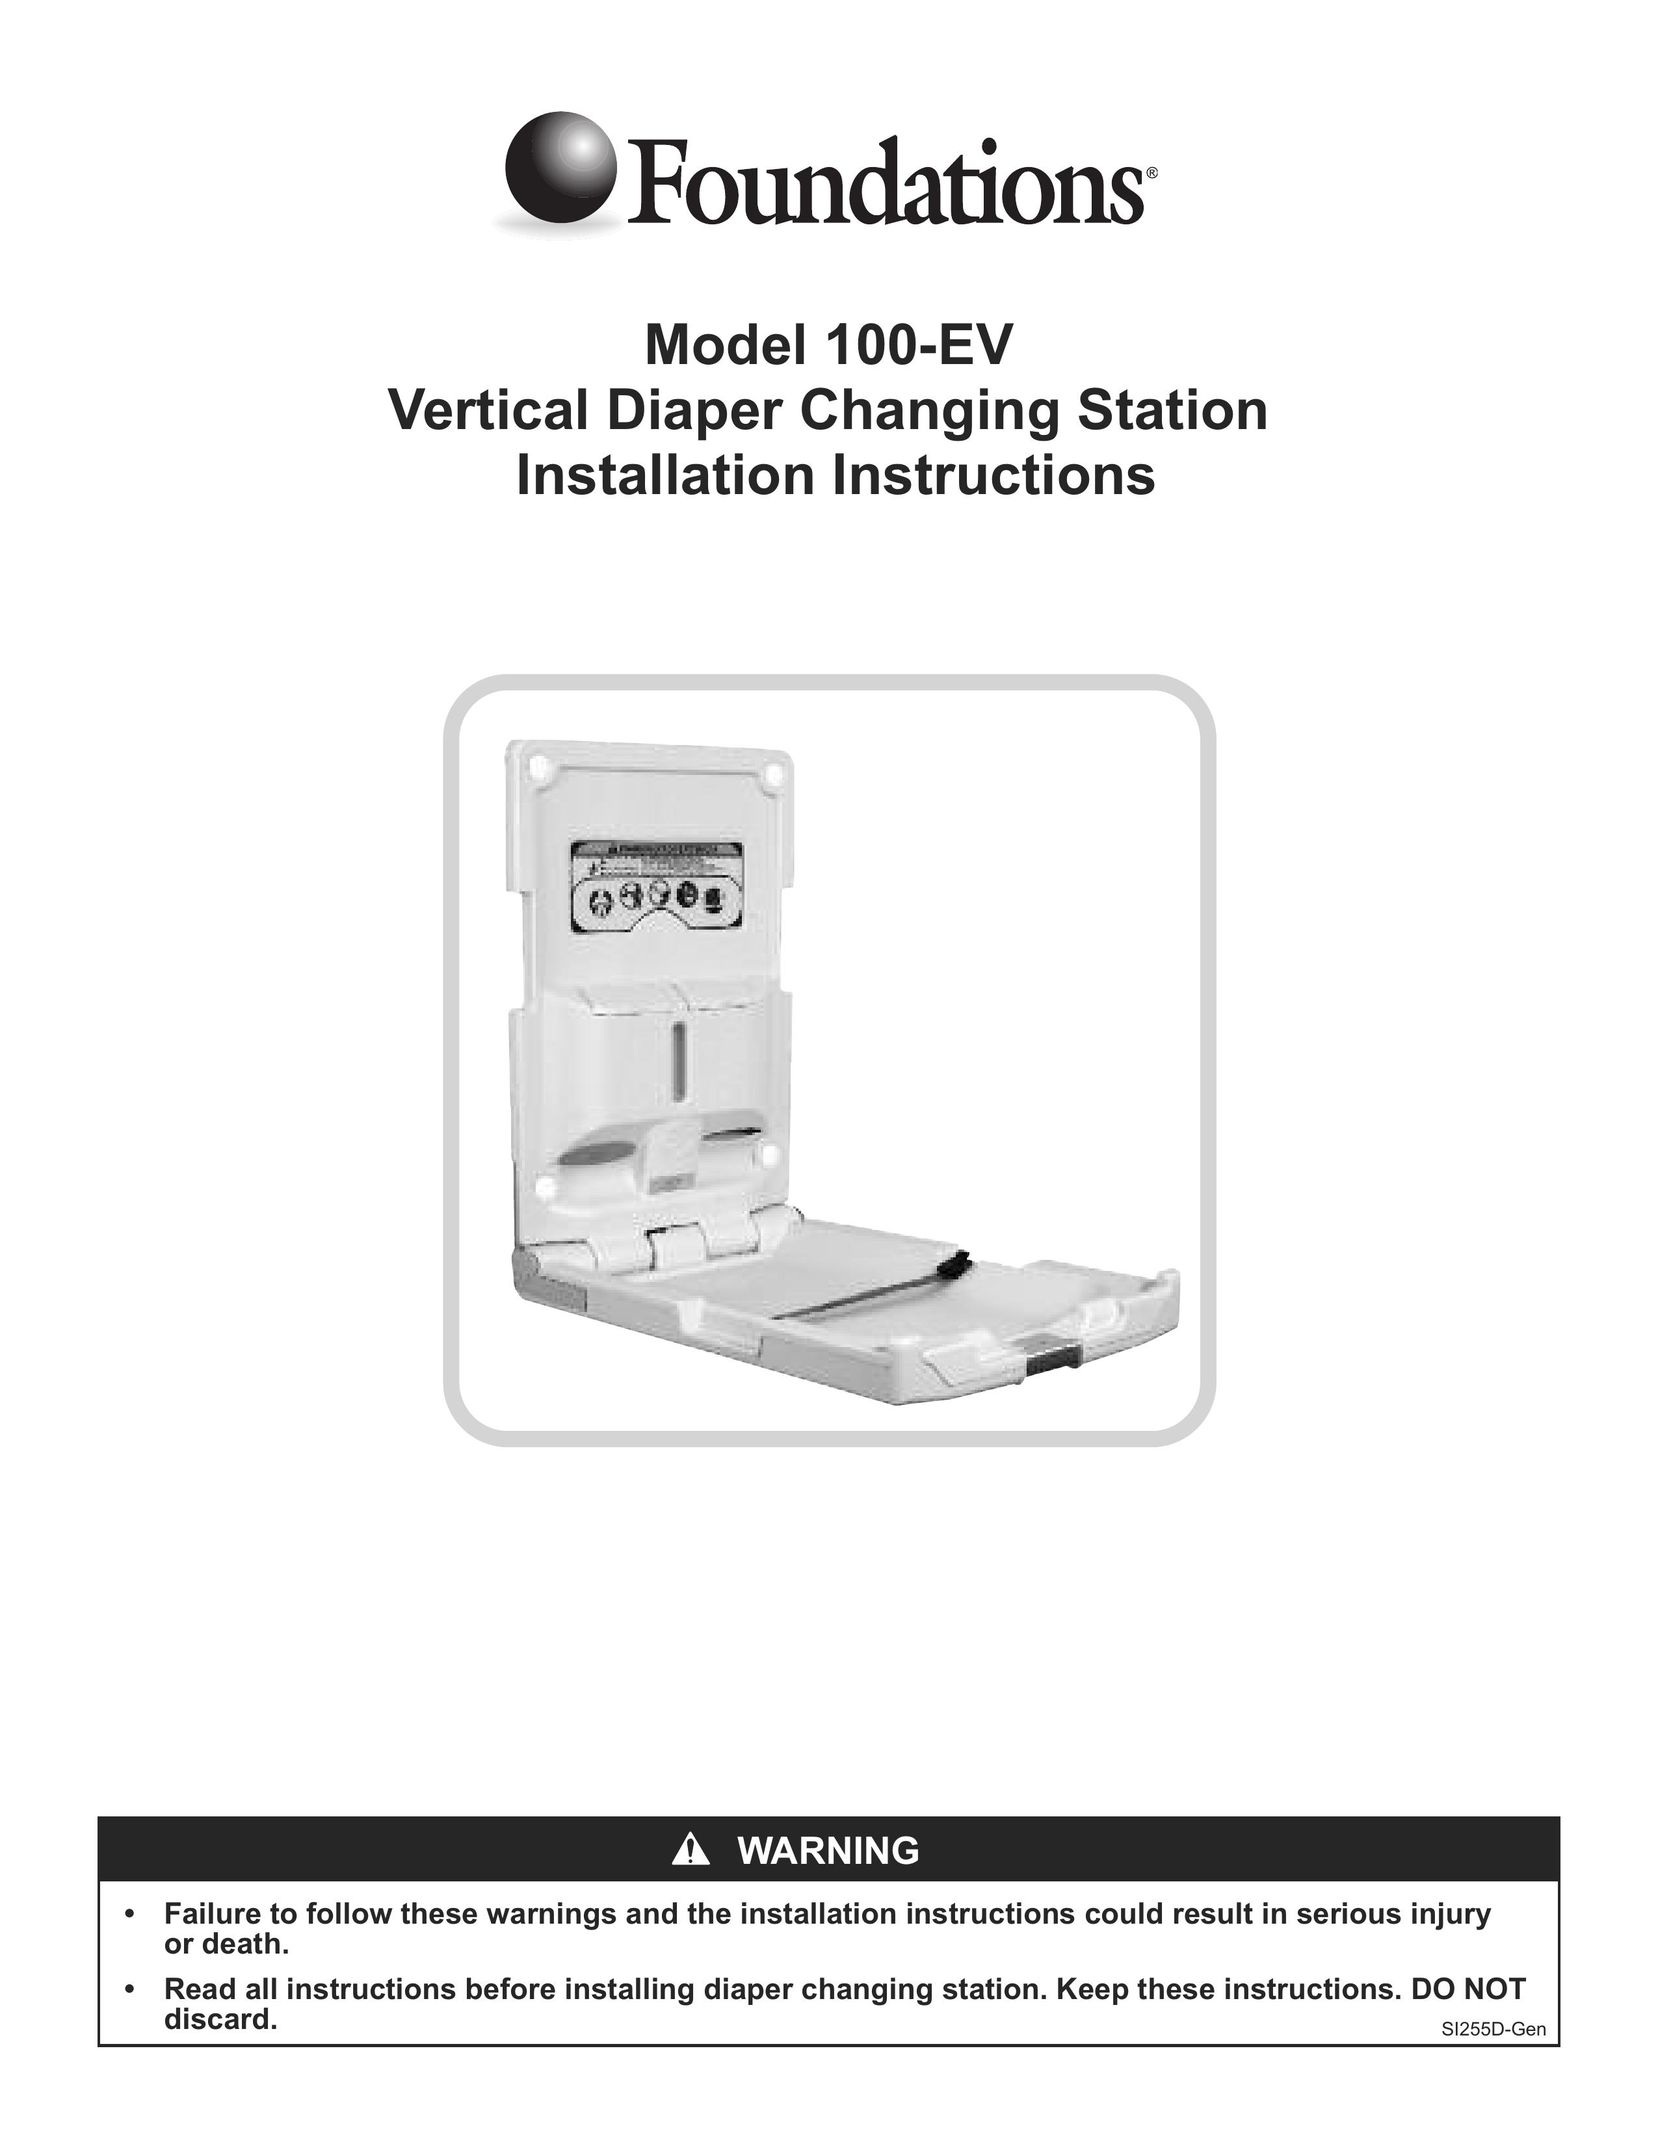 Foundations SI255D-Gen Baby Furniture User Manual